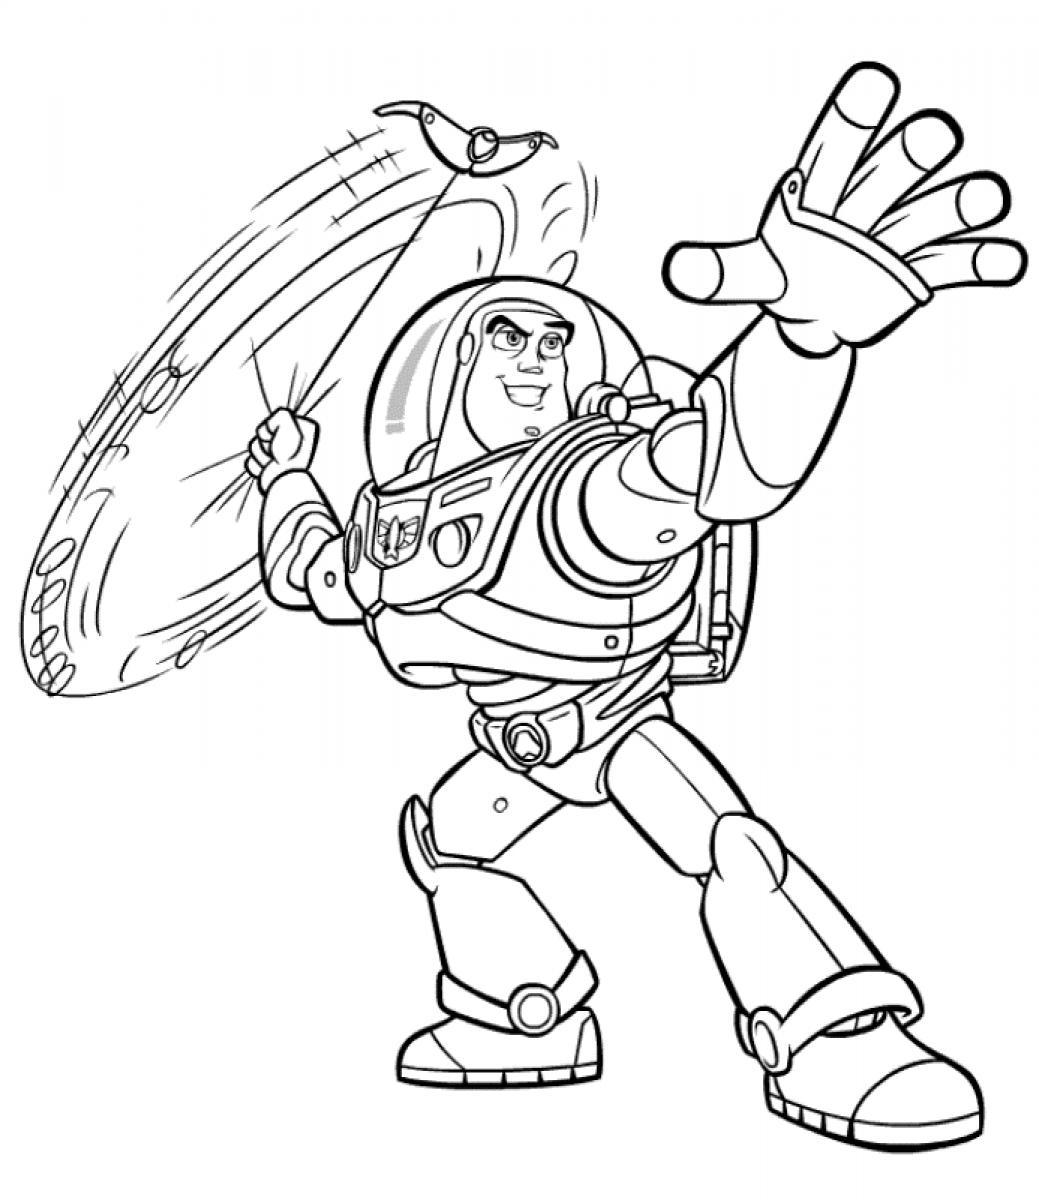 buzz lightyear online coloring pages